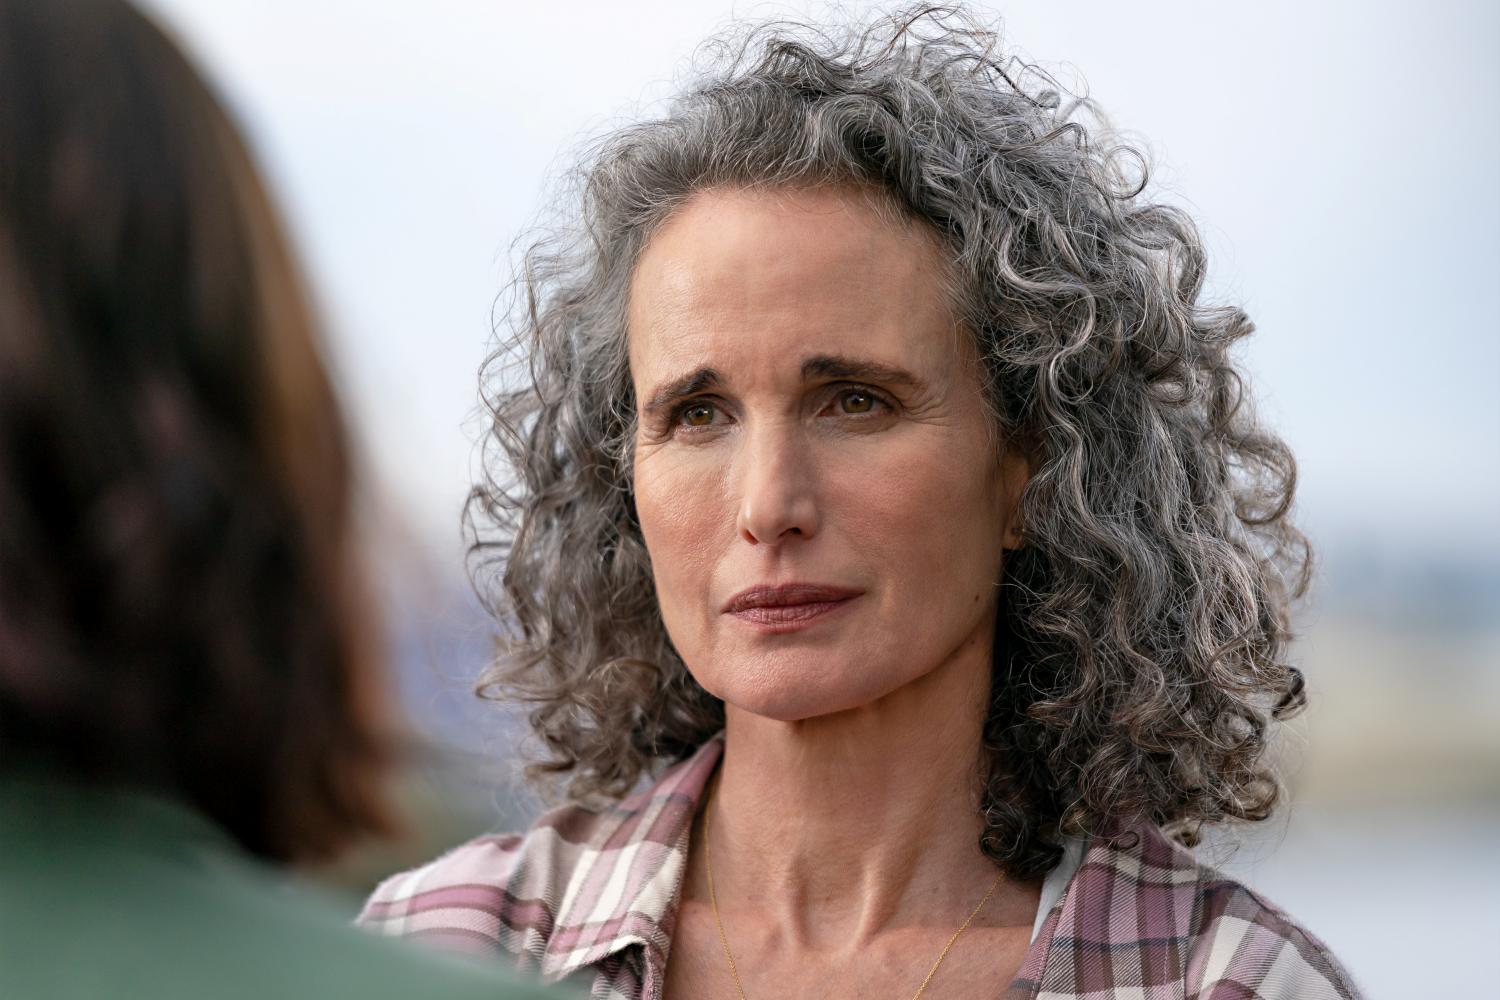 Andie MacDowell of The Way Home on Hallmark